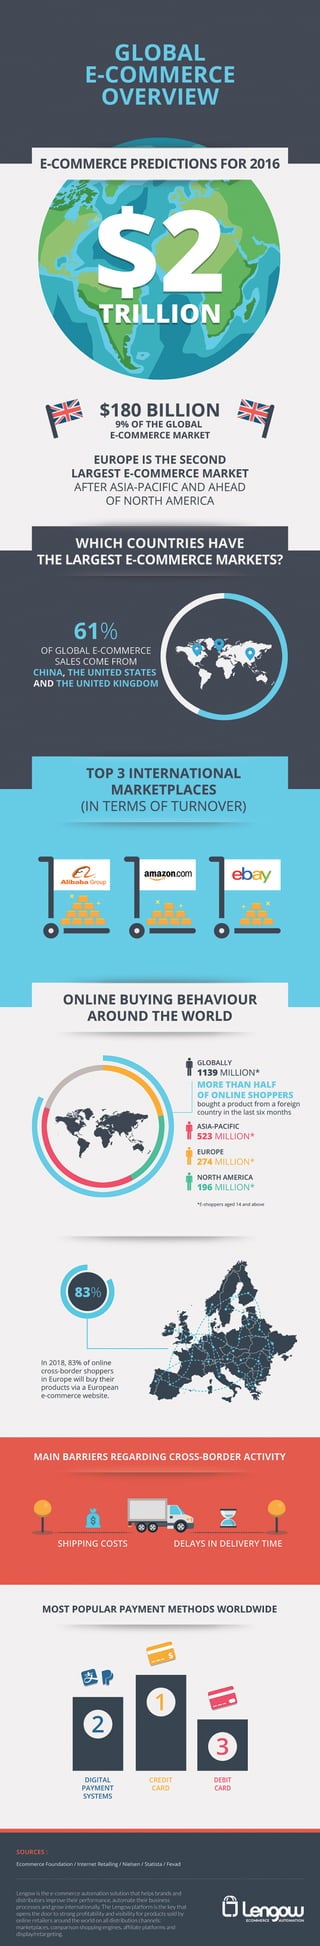 [Infography] Global ecommerce overview